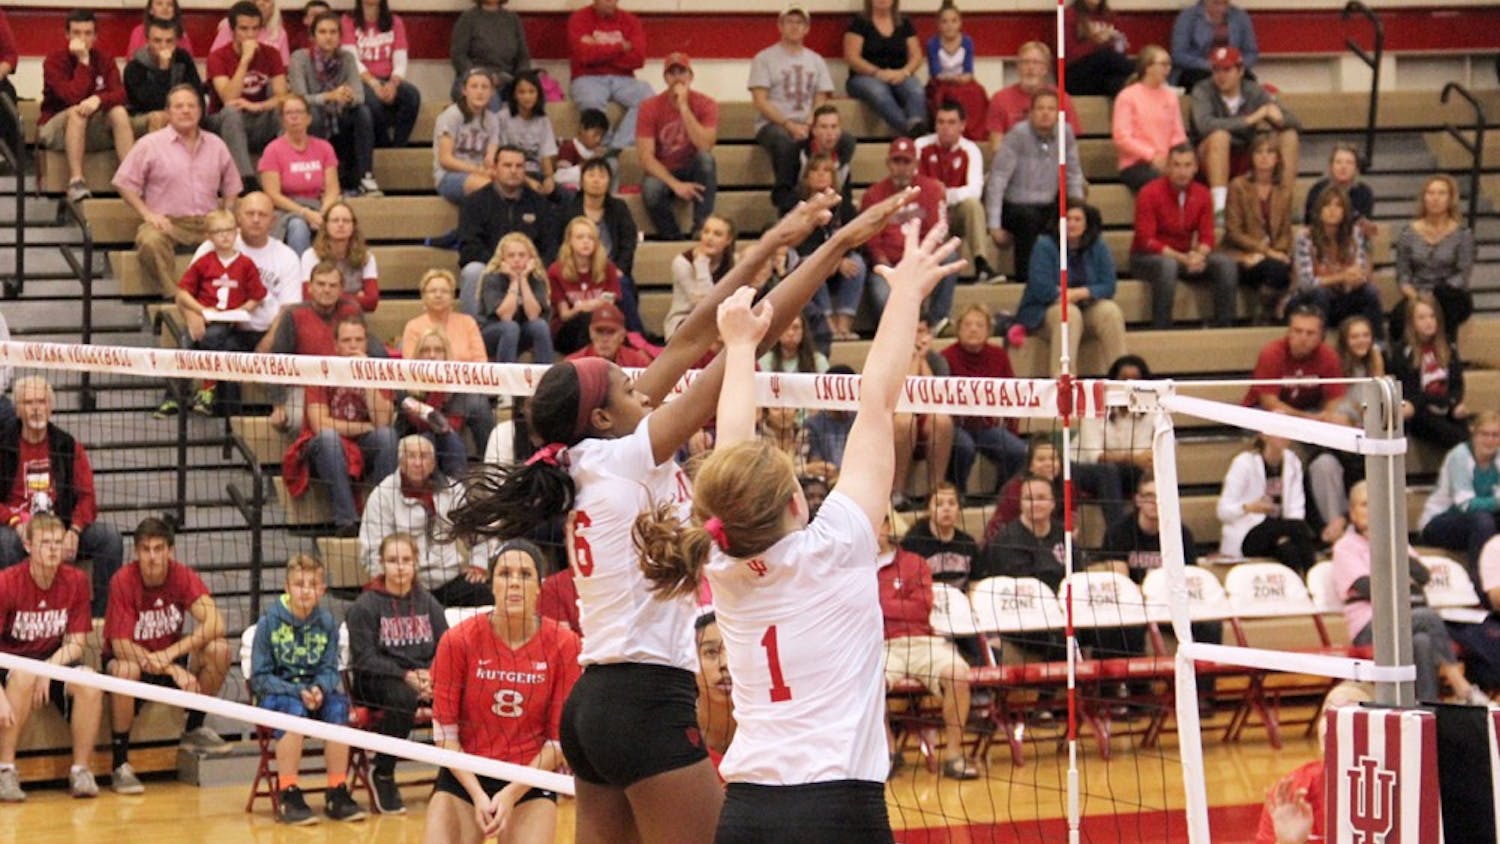 Deyshia Lofton (left) and Victoria Brisack from IU Hoosiers Volleyball defend the ball as they compete agaisnt Rutgers Scarlet Knights Friday night at the University Gym.